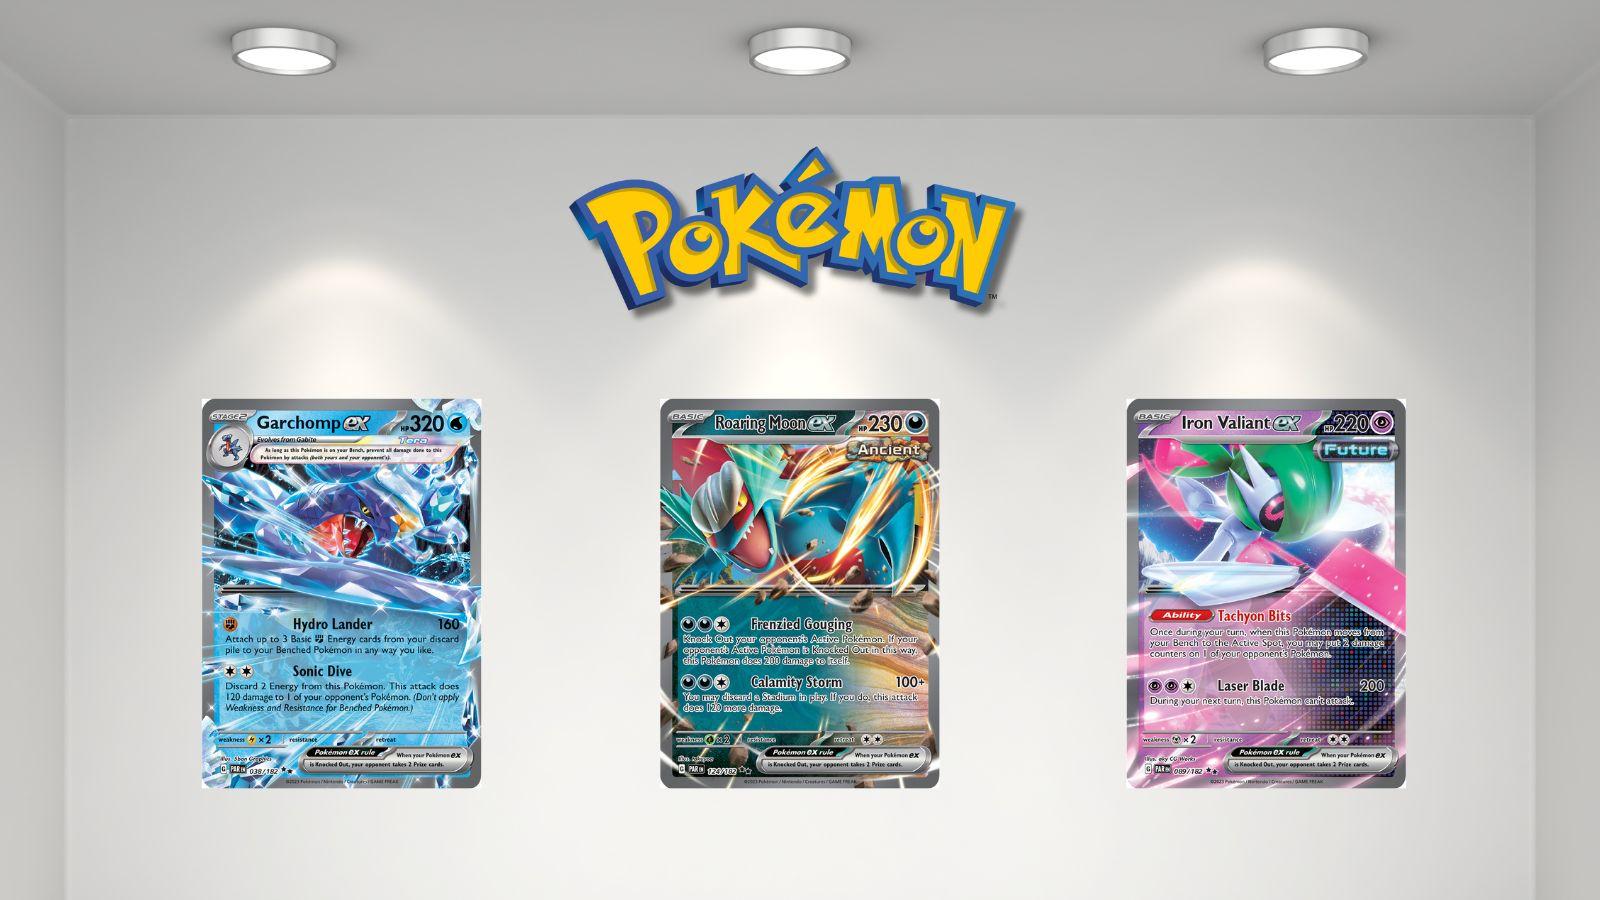 Garchomp Ex, Roaring Moon Ex, and Iron Valiant Ex against an art gallery background with a Pokemon logo above